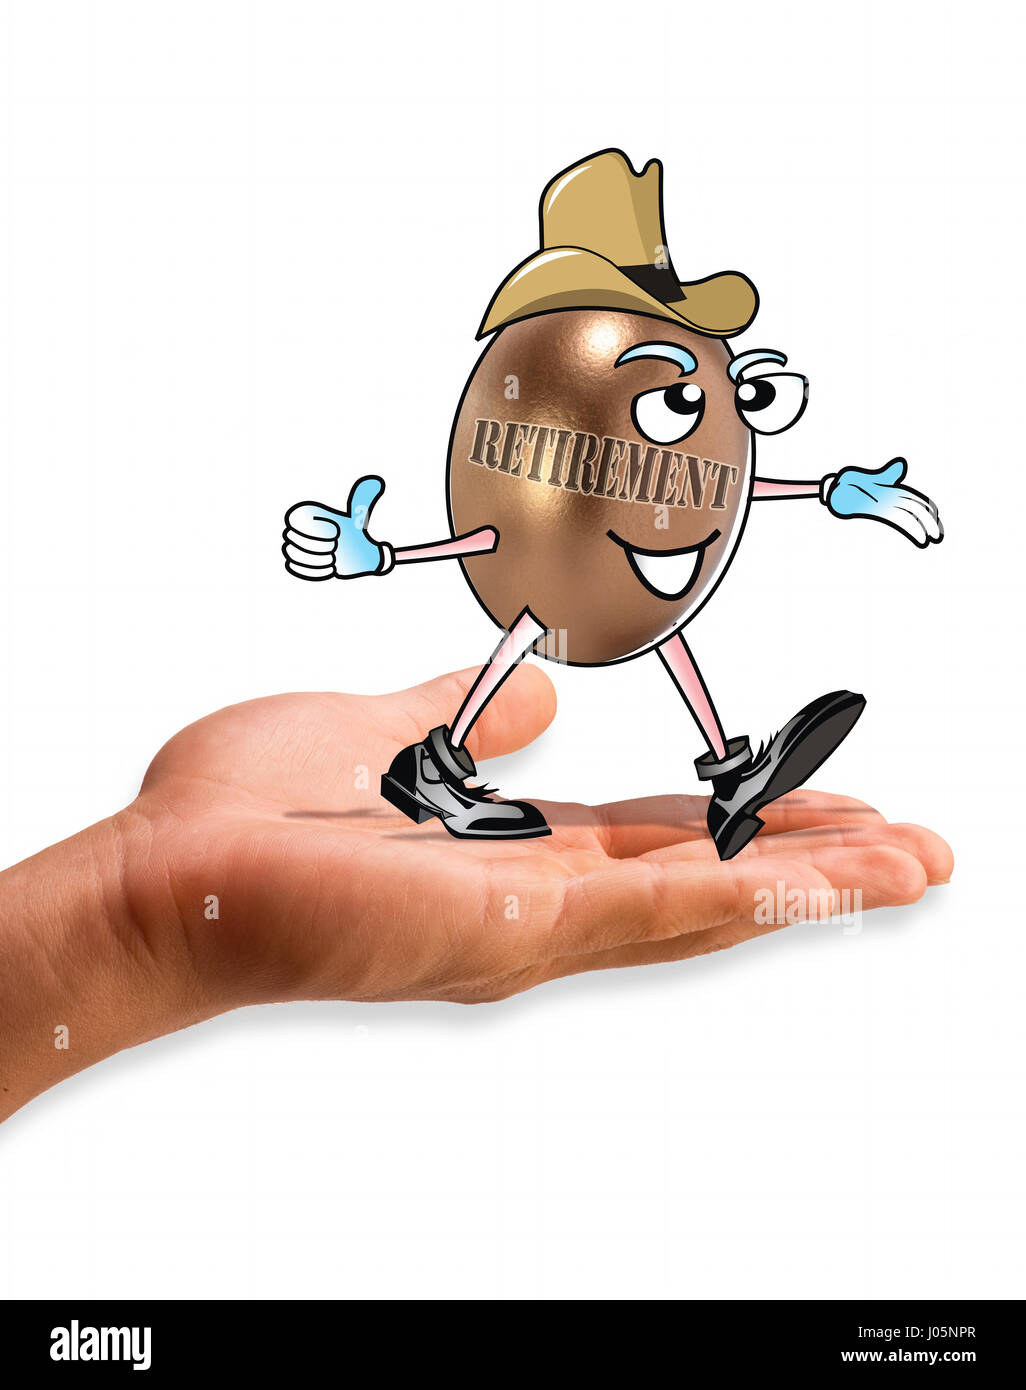 Retirement in hand with cowboy egg man. Stock Photo